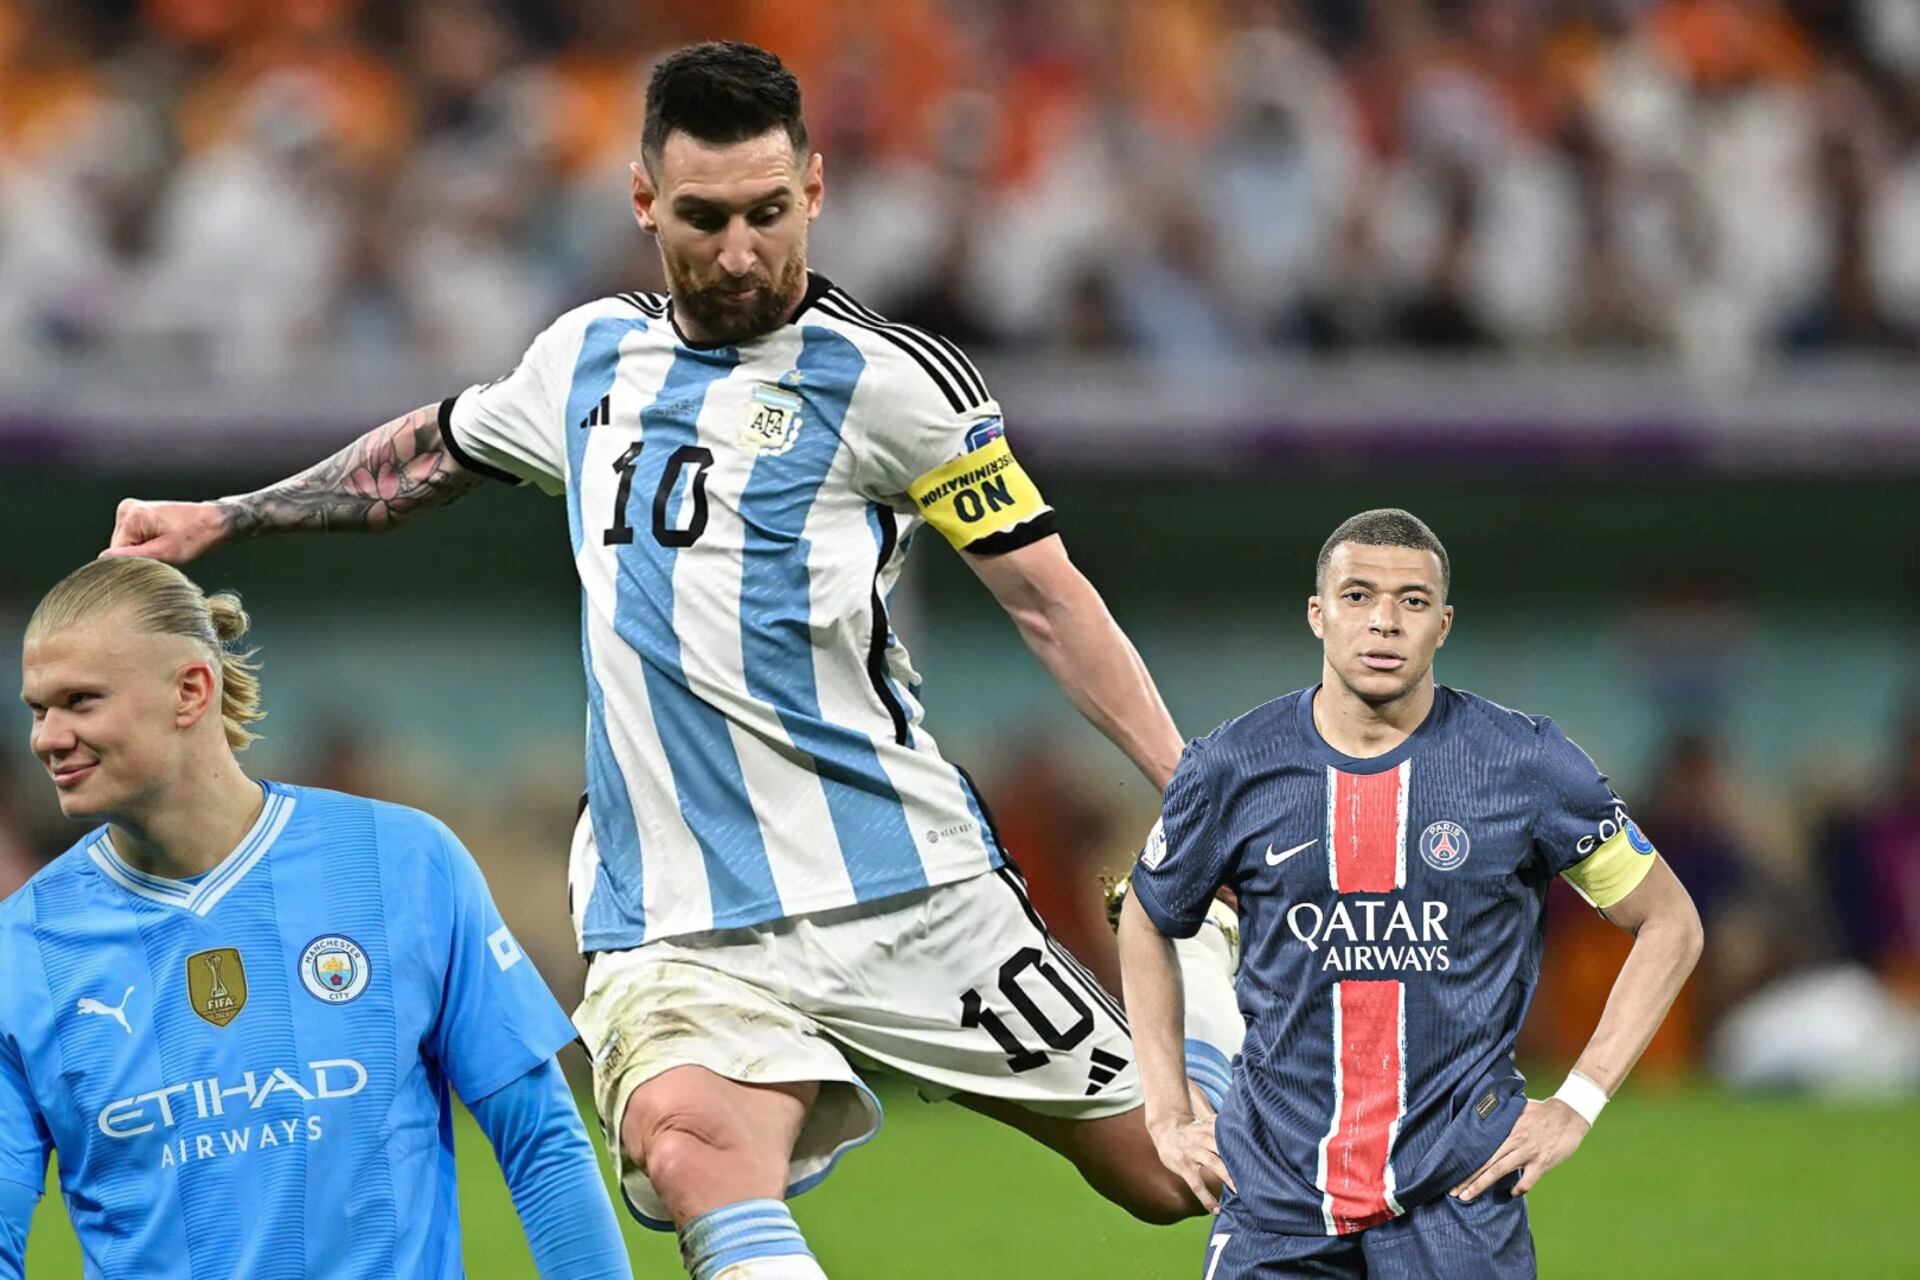 Not Messi, with Copa America as his target, the Argentine striker who thinks is on the same level as Haaland or Mbappé